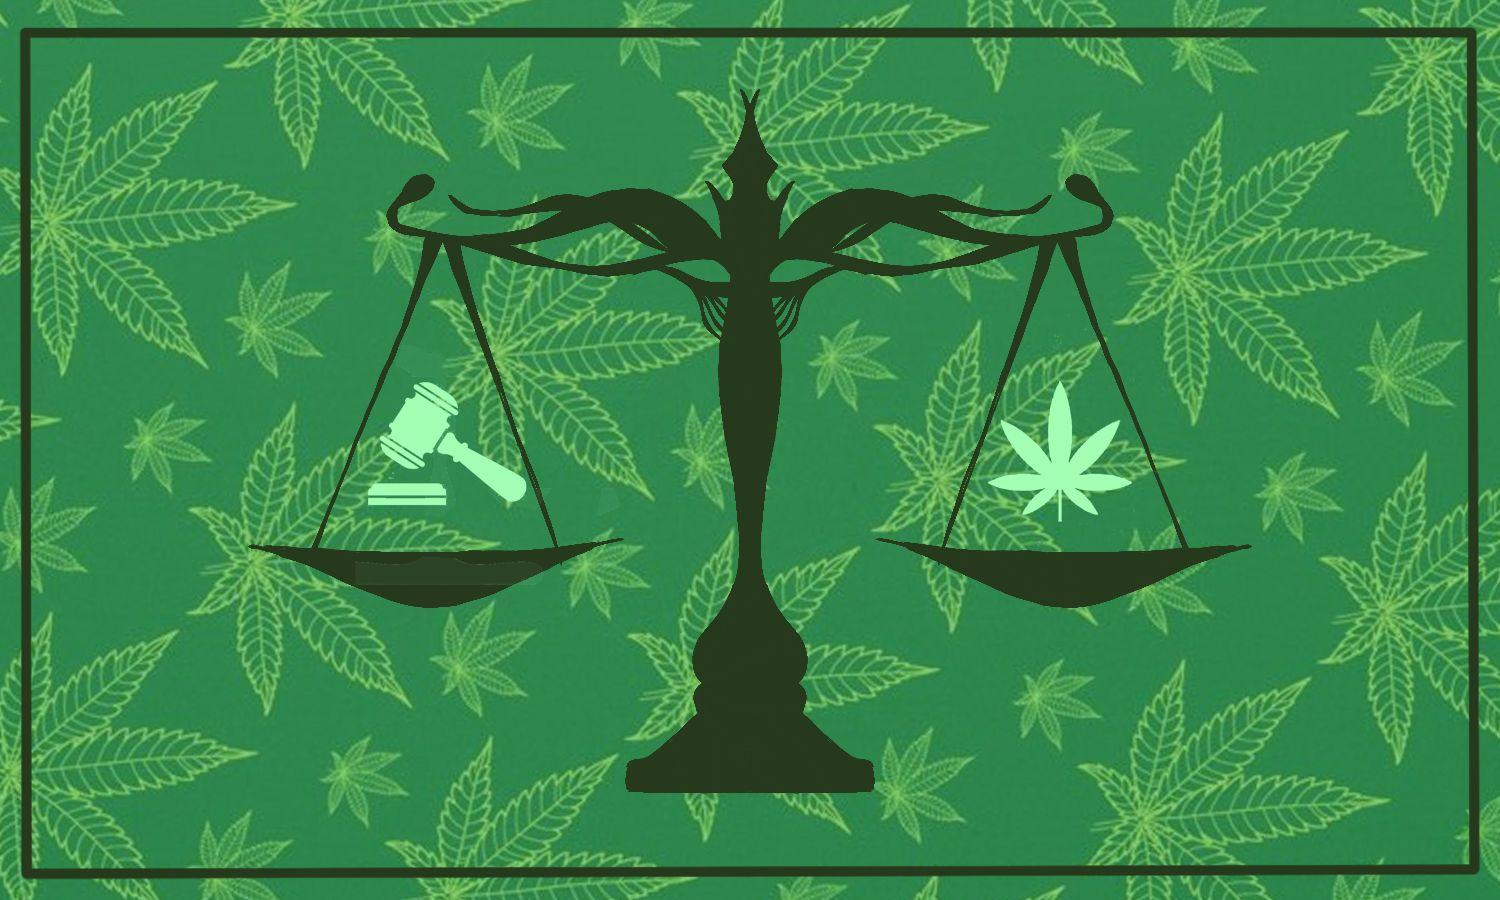 Justice scale with cannabis leaf on one side and a gavel on the other